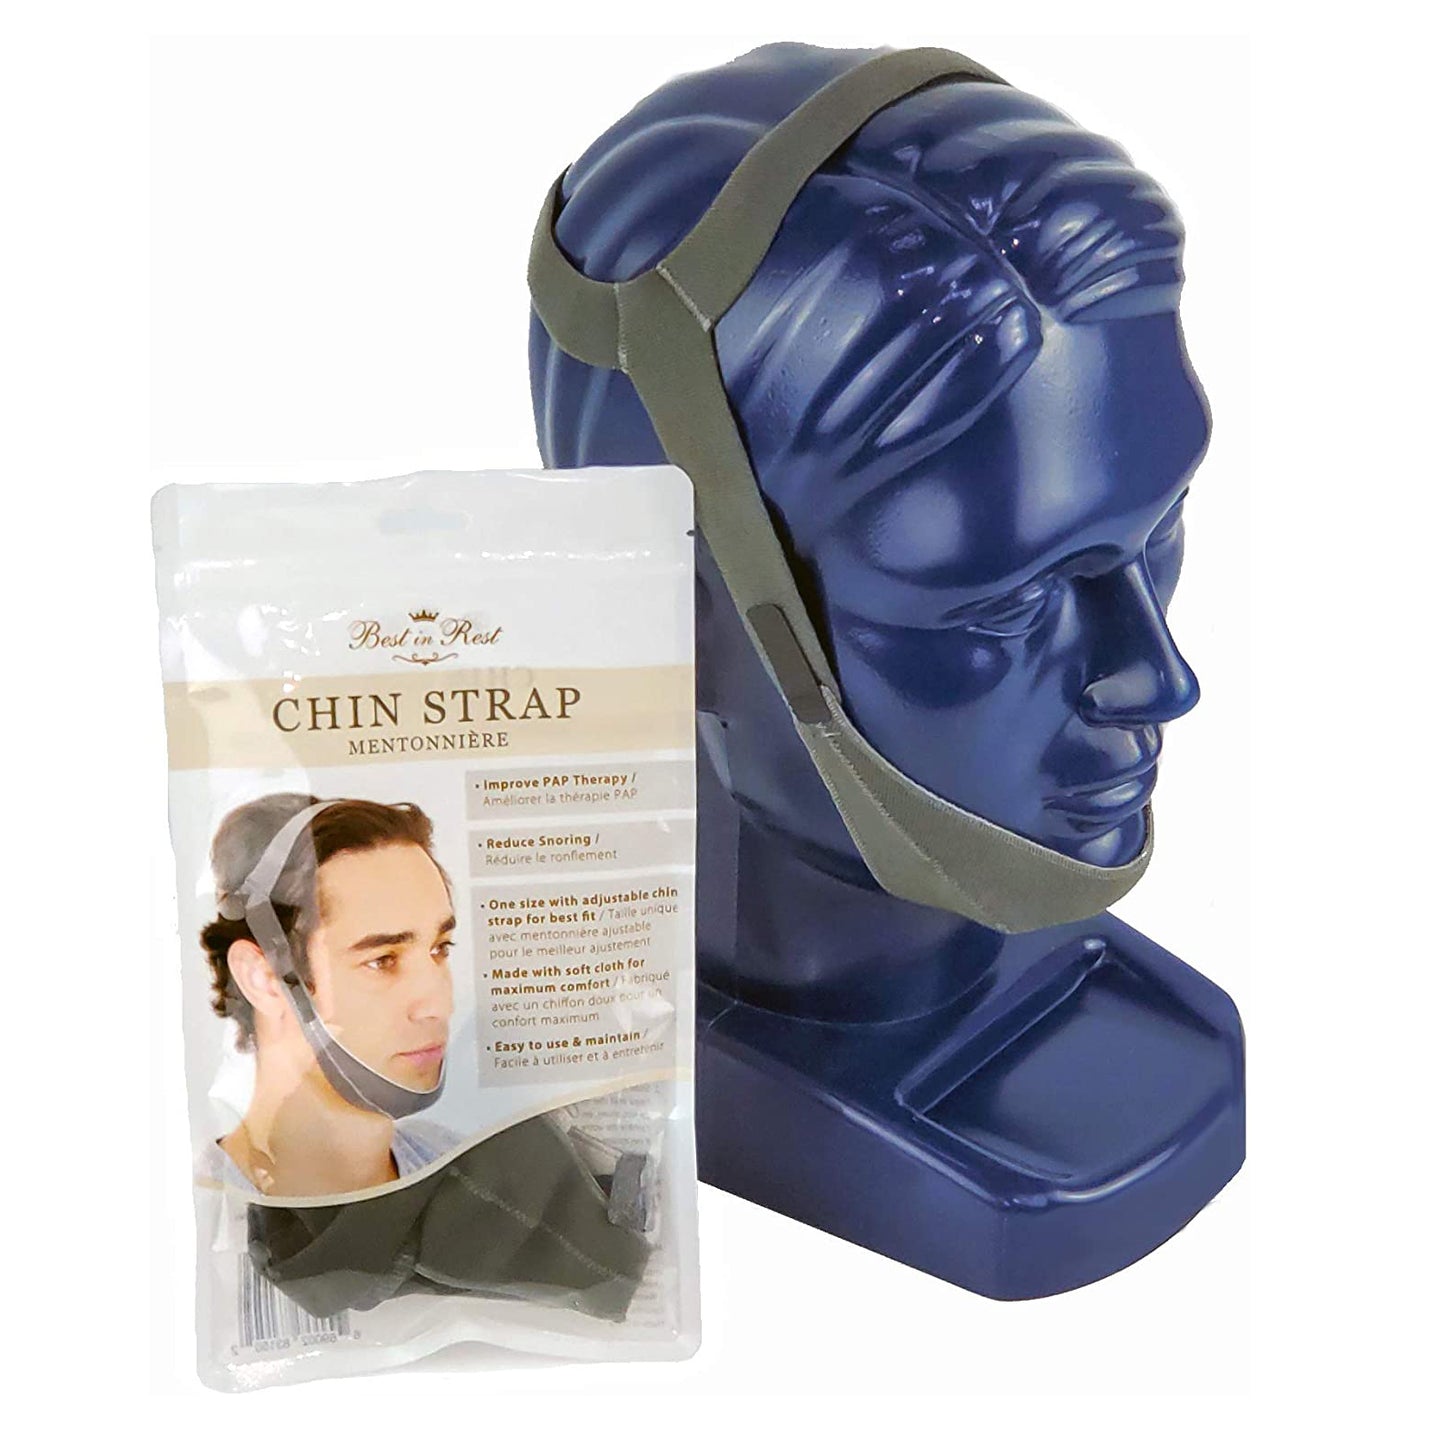 Packaging for chin strap.